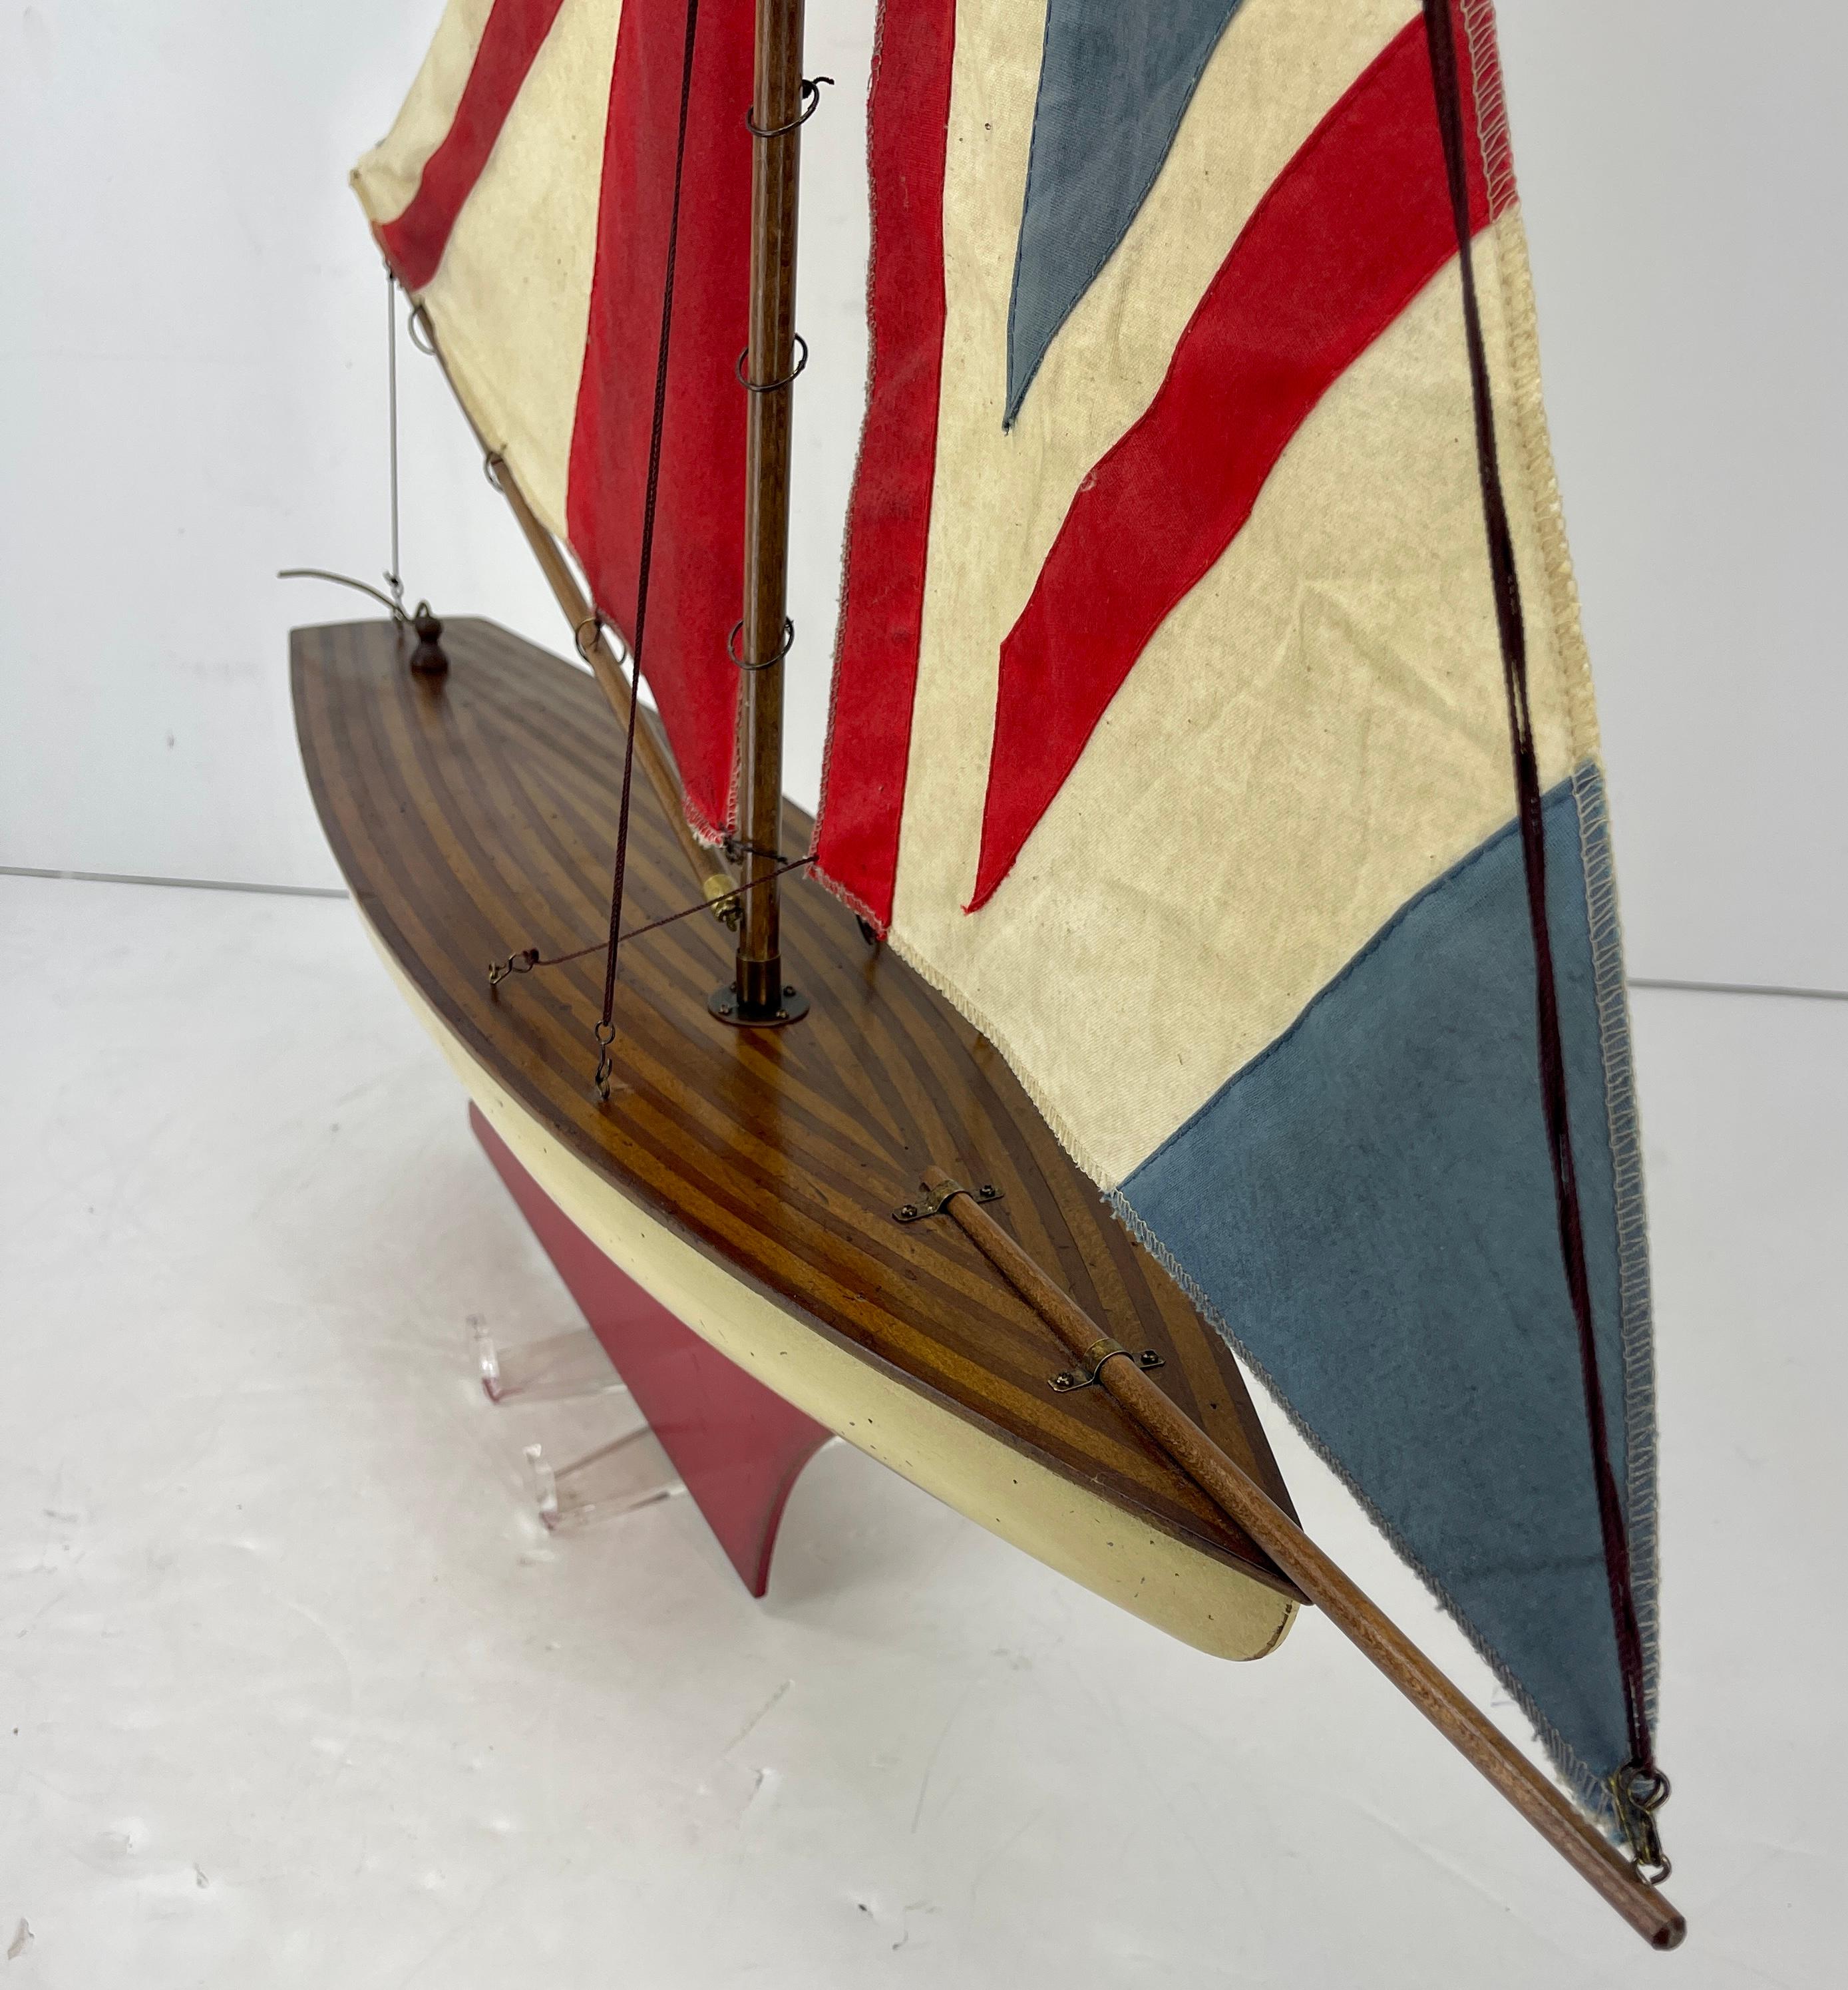 English Carved Wood Sailboat Model with Parquetry Deck and Union Jack Sailcloth 5